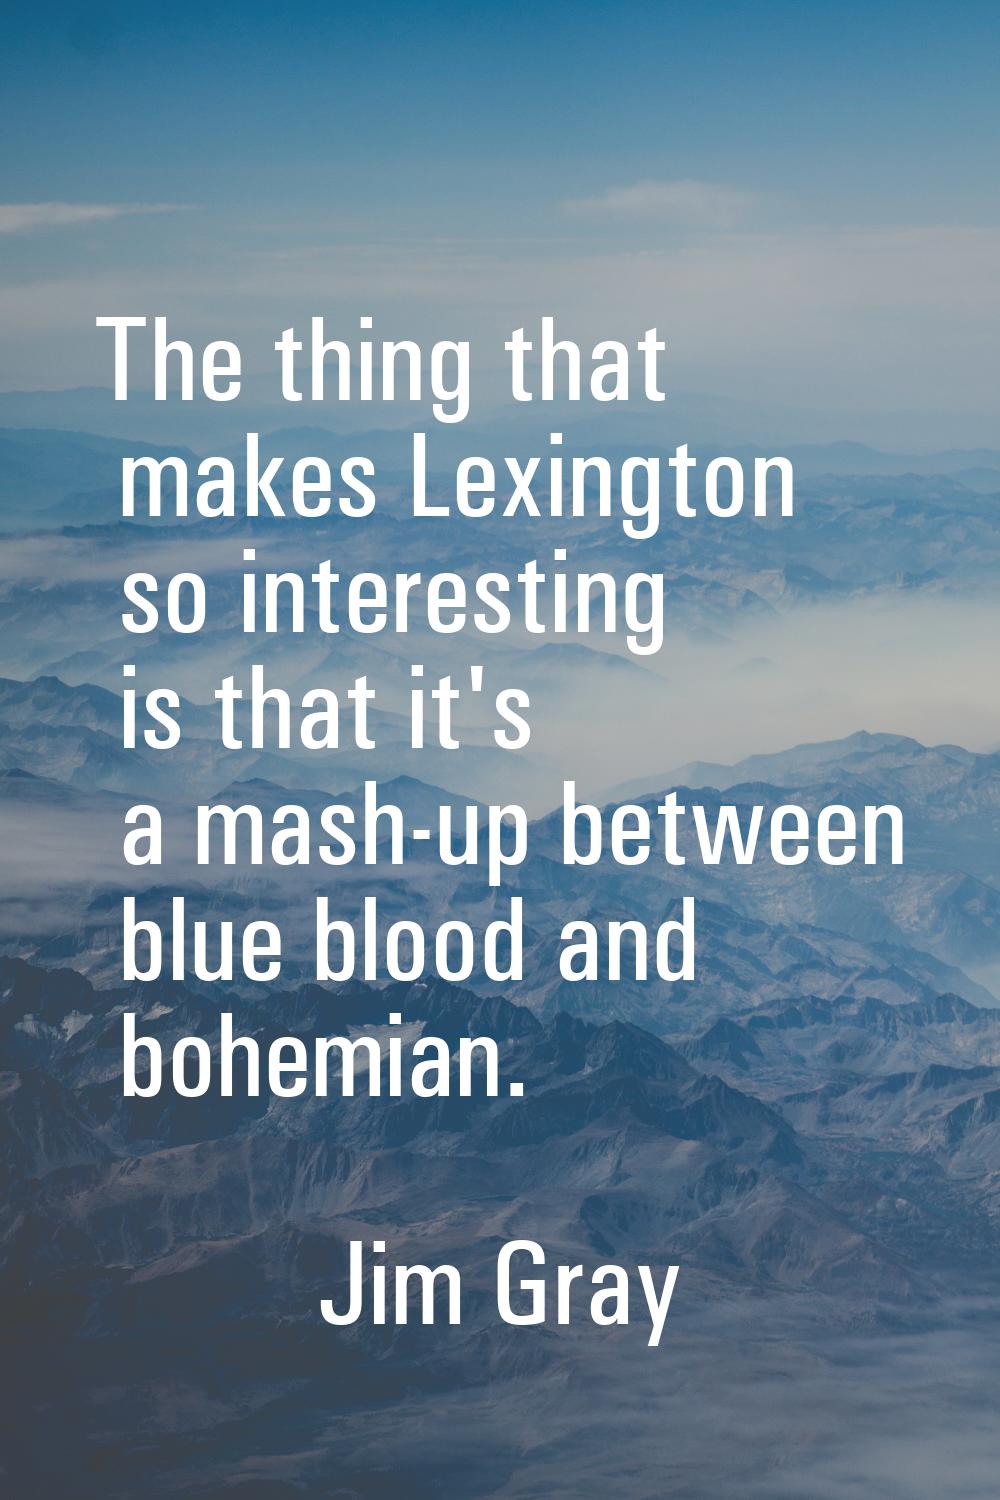 The thing that makes Lexington so interesting is that it's a mash-up between blue blood and bohemia